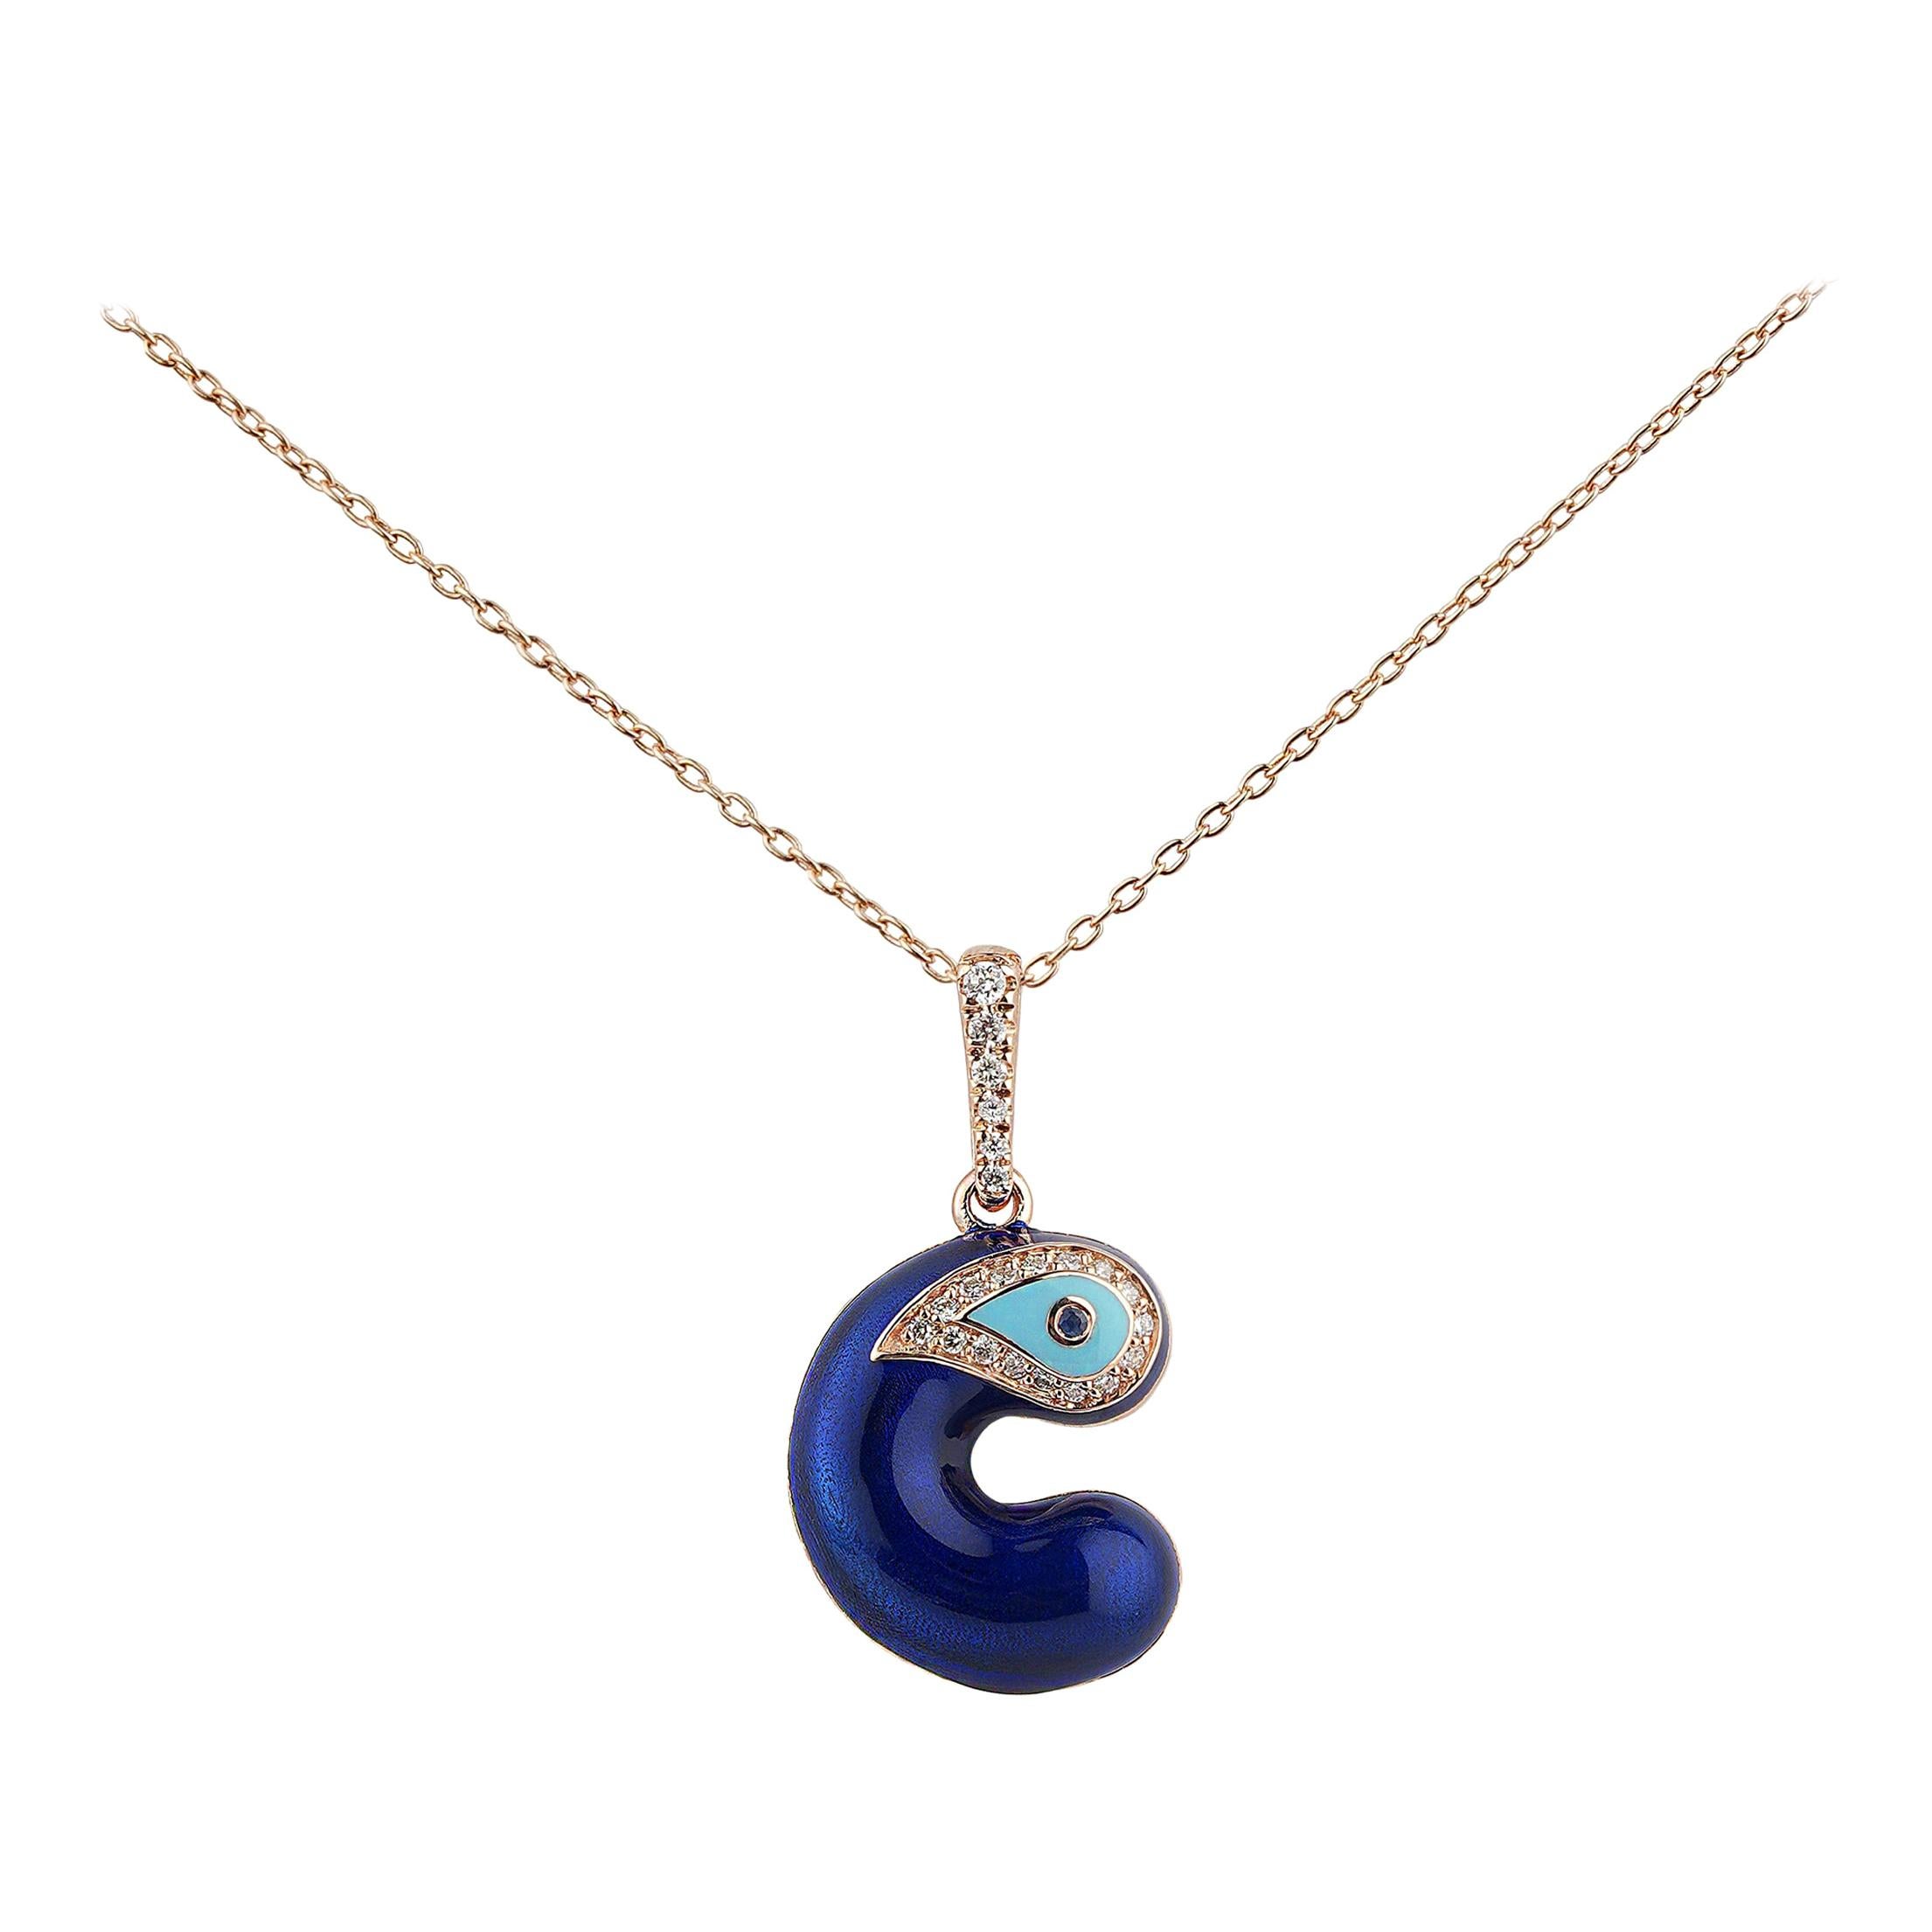 Inspired by The Iconic Evil Eve Symbol Nazarlique Handcrafting Blue Enamel Evil Eye ID Letter Form C Charm Necklace In 14K Yellow Gold With Diamond and Sapphire Is A Striking Example Of The Sentimental Style.

Looks Super Sophisticated And Cool On